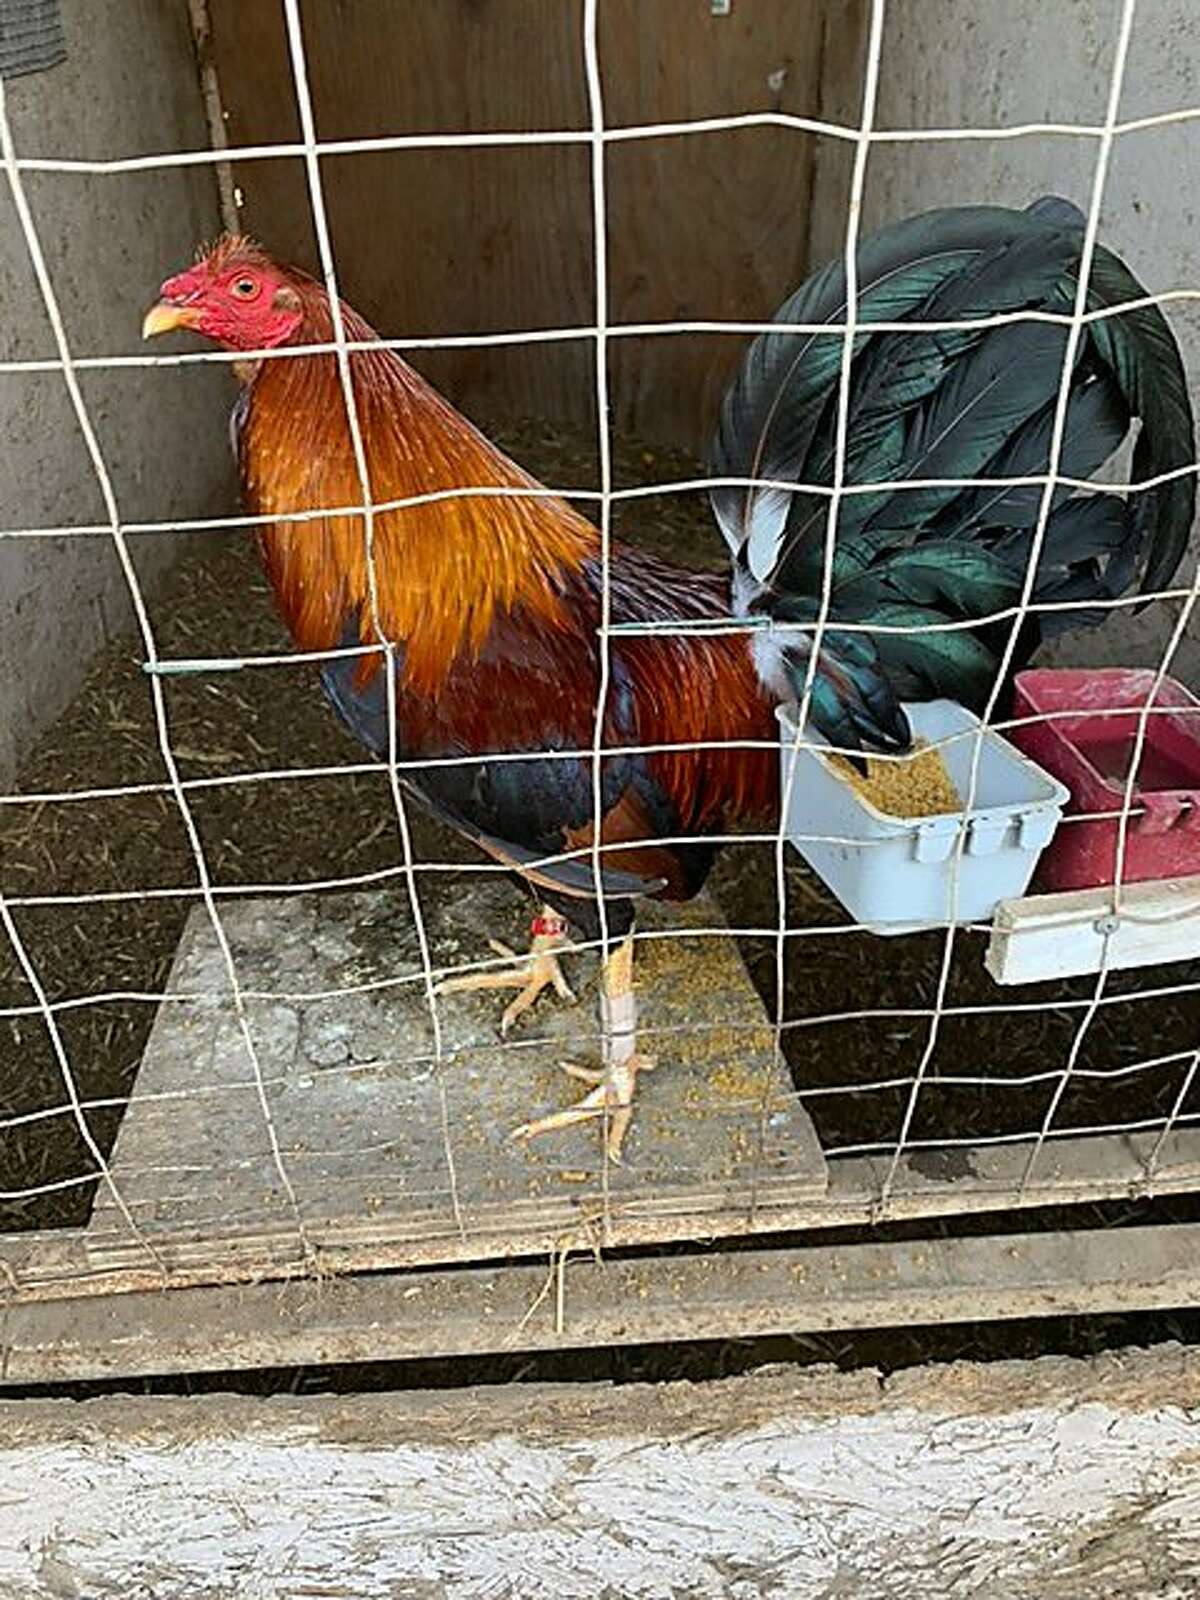 One of the 123 roosters seized following a large cockfighting bust in rural Pleasanton on April 25, 2020. Rooster is seen here with band on its leg, which is used to affix a razor blade.